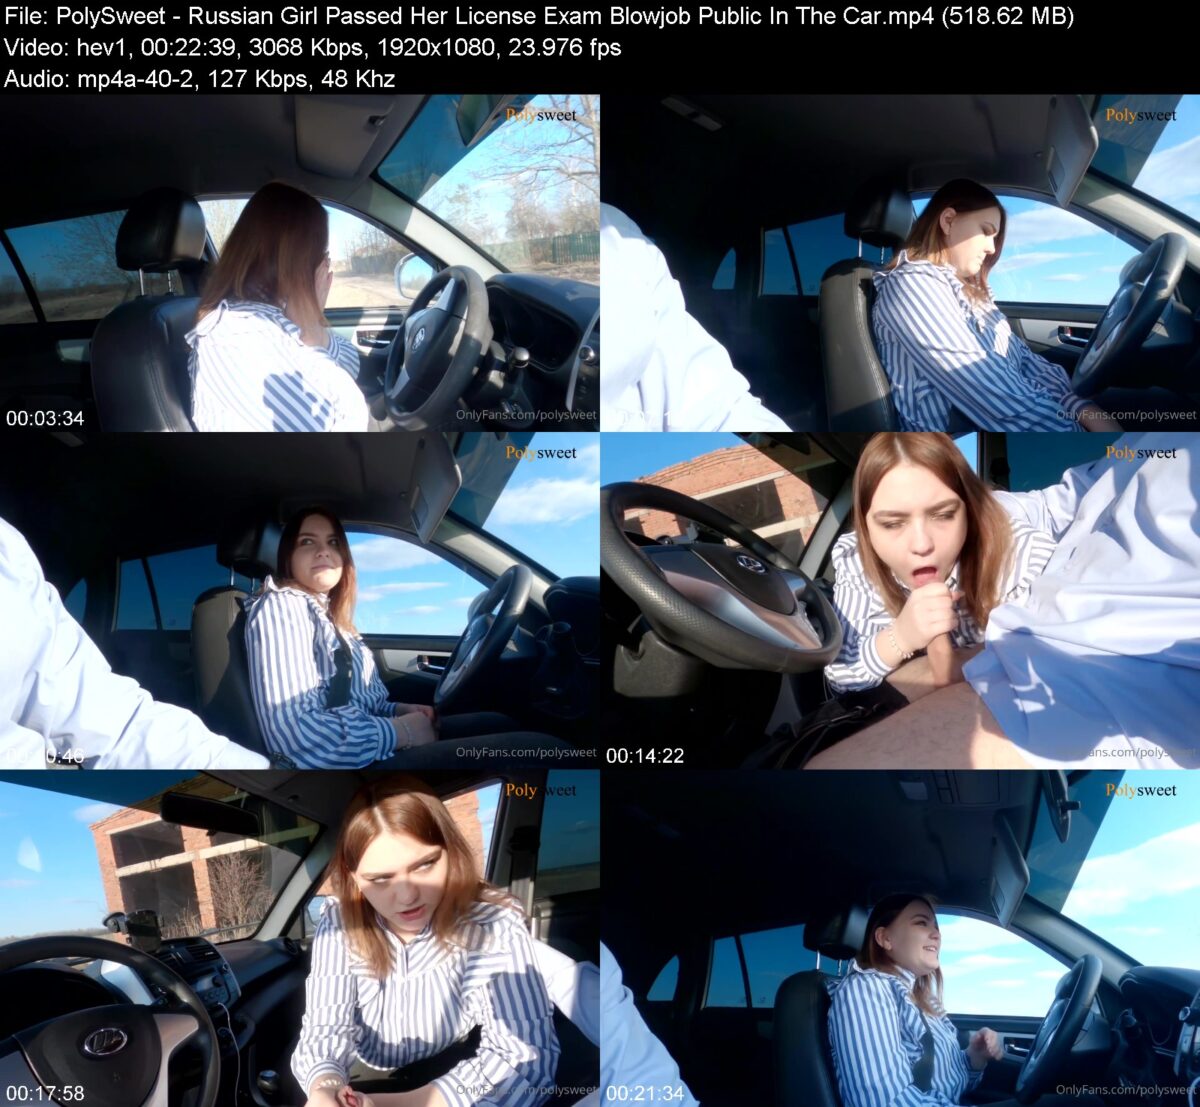 PolySweet in Russian Girl Passed Her License Exam Blowjob Public In The Car